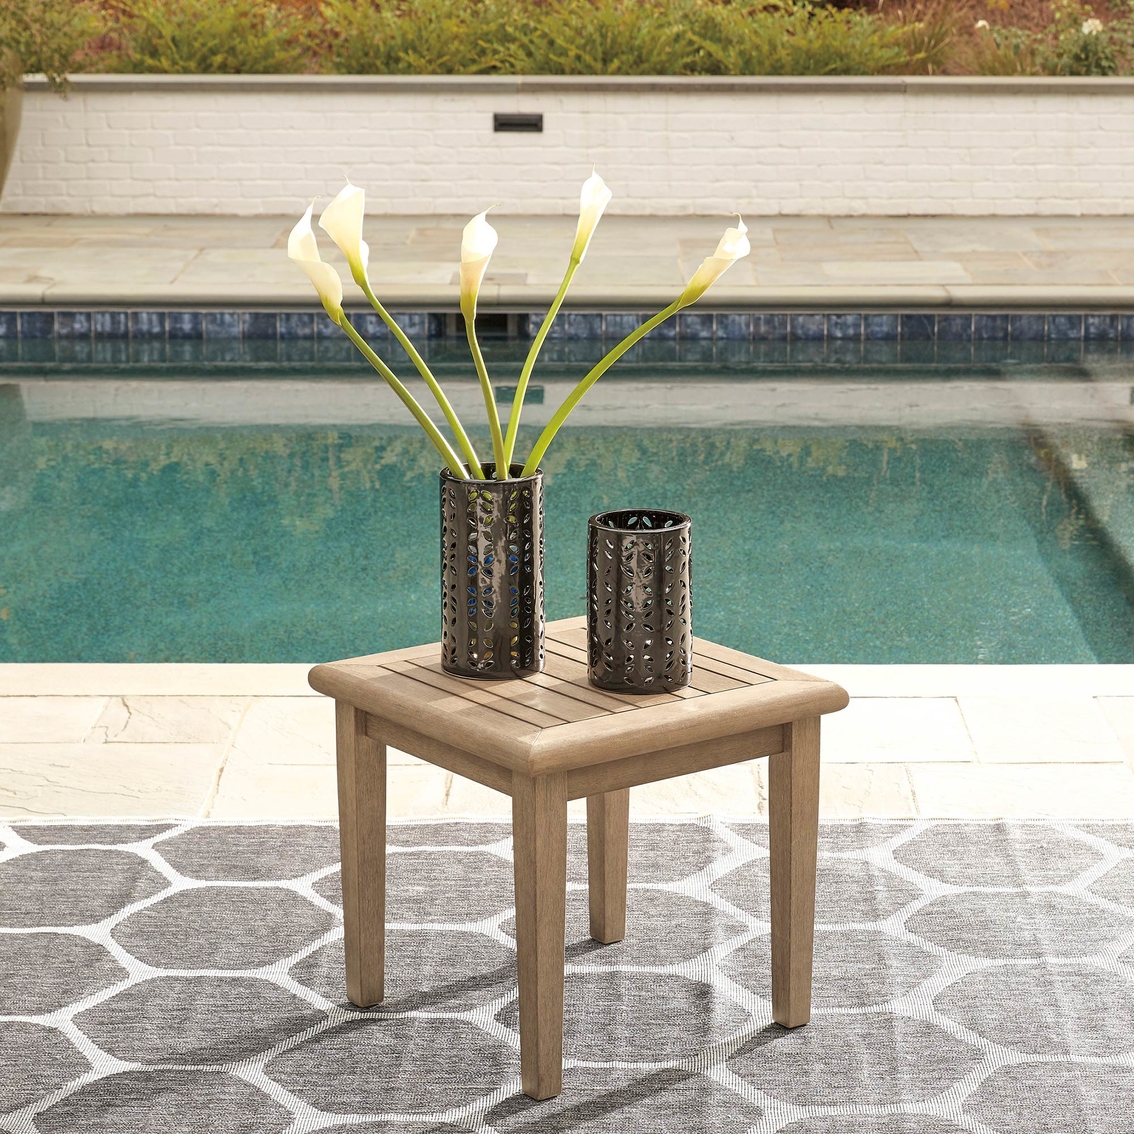 Signature Design by Ashley Clare View 4 pc. Outdoor Sofa and Loveseat Set - Image 7 of 7